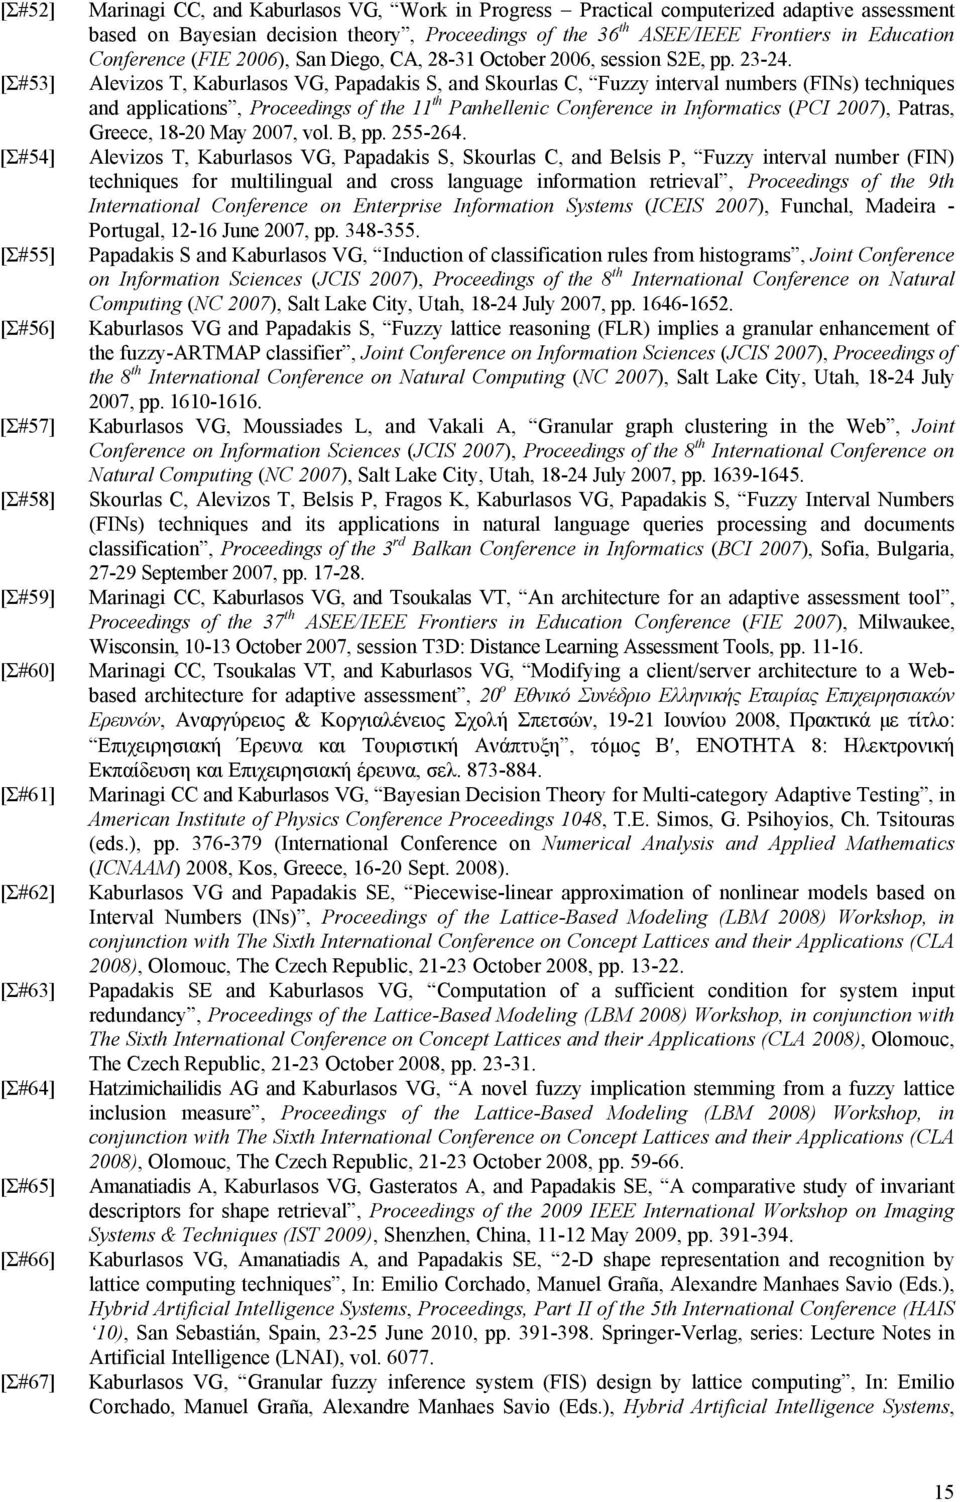 Alevizos T, Kaburlasos VG, Papadakis S, and Skourlas C, Fuzzy interval numbers (FINs) techniques and applications, Proceedings of the 11 th Panhellenic Conference in Informatics (PCI 2007), Patras,